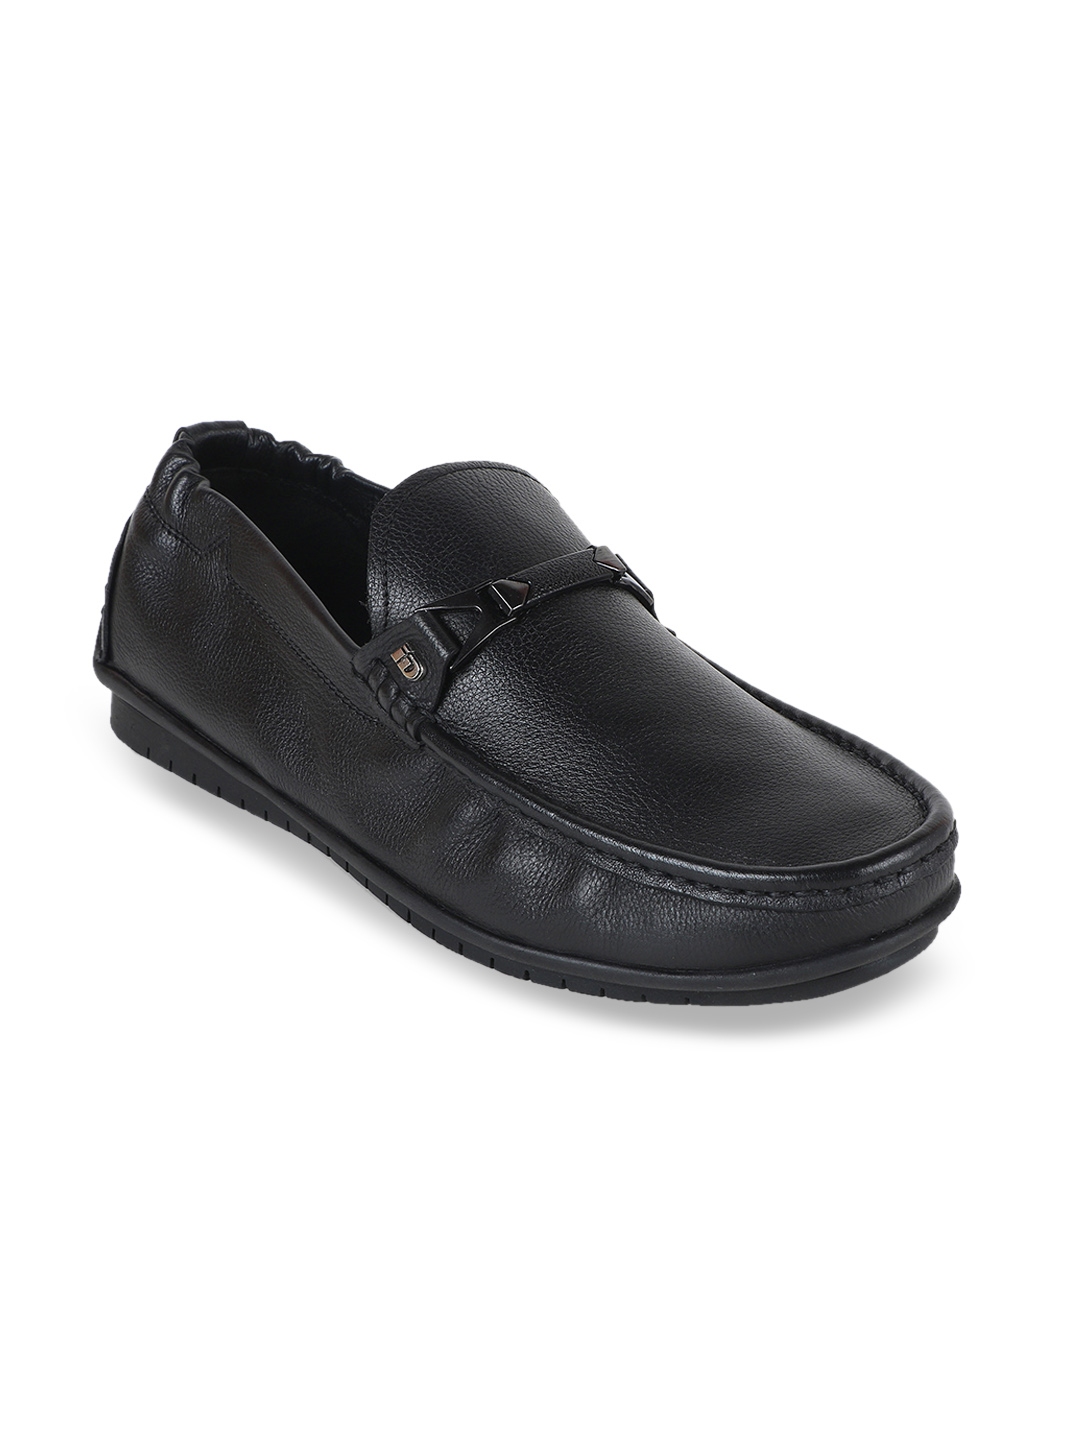 Buy ID Men Black Leather Loafers - Casual Shoes for Men 10651390 | Myntra